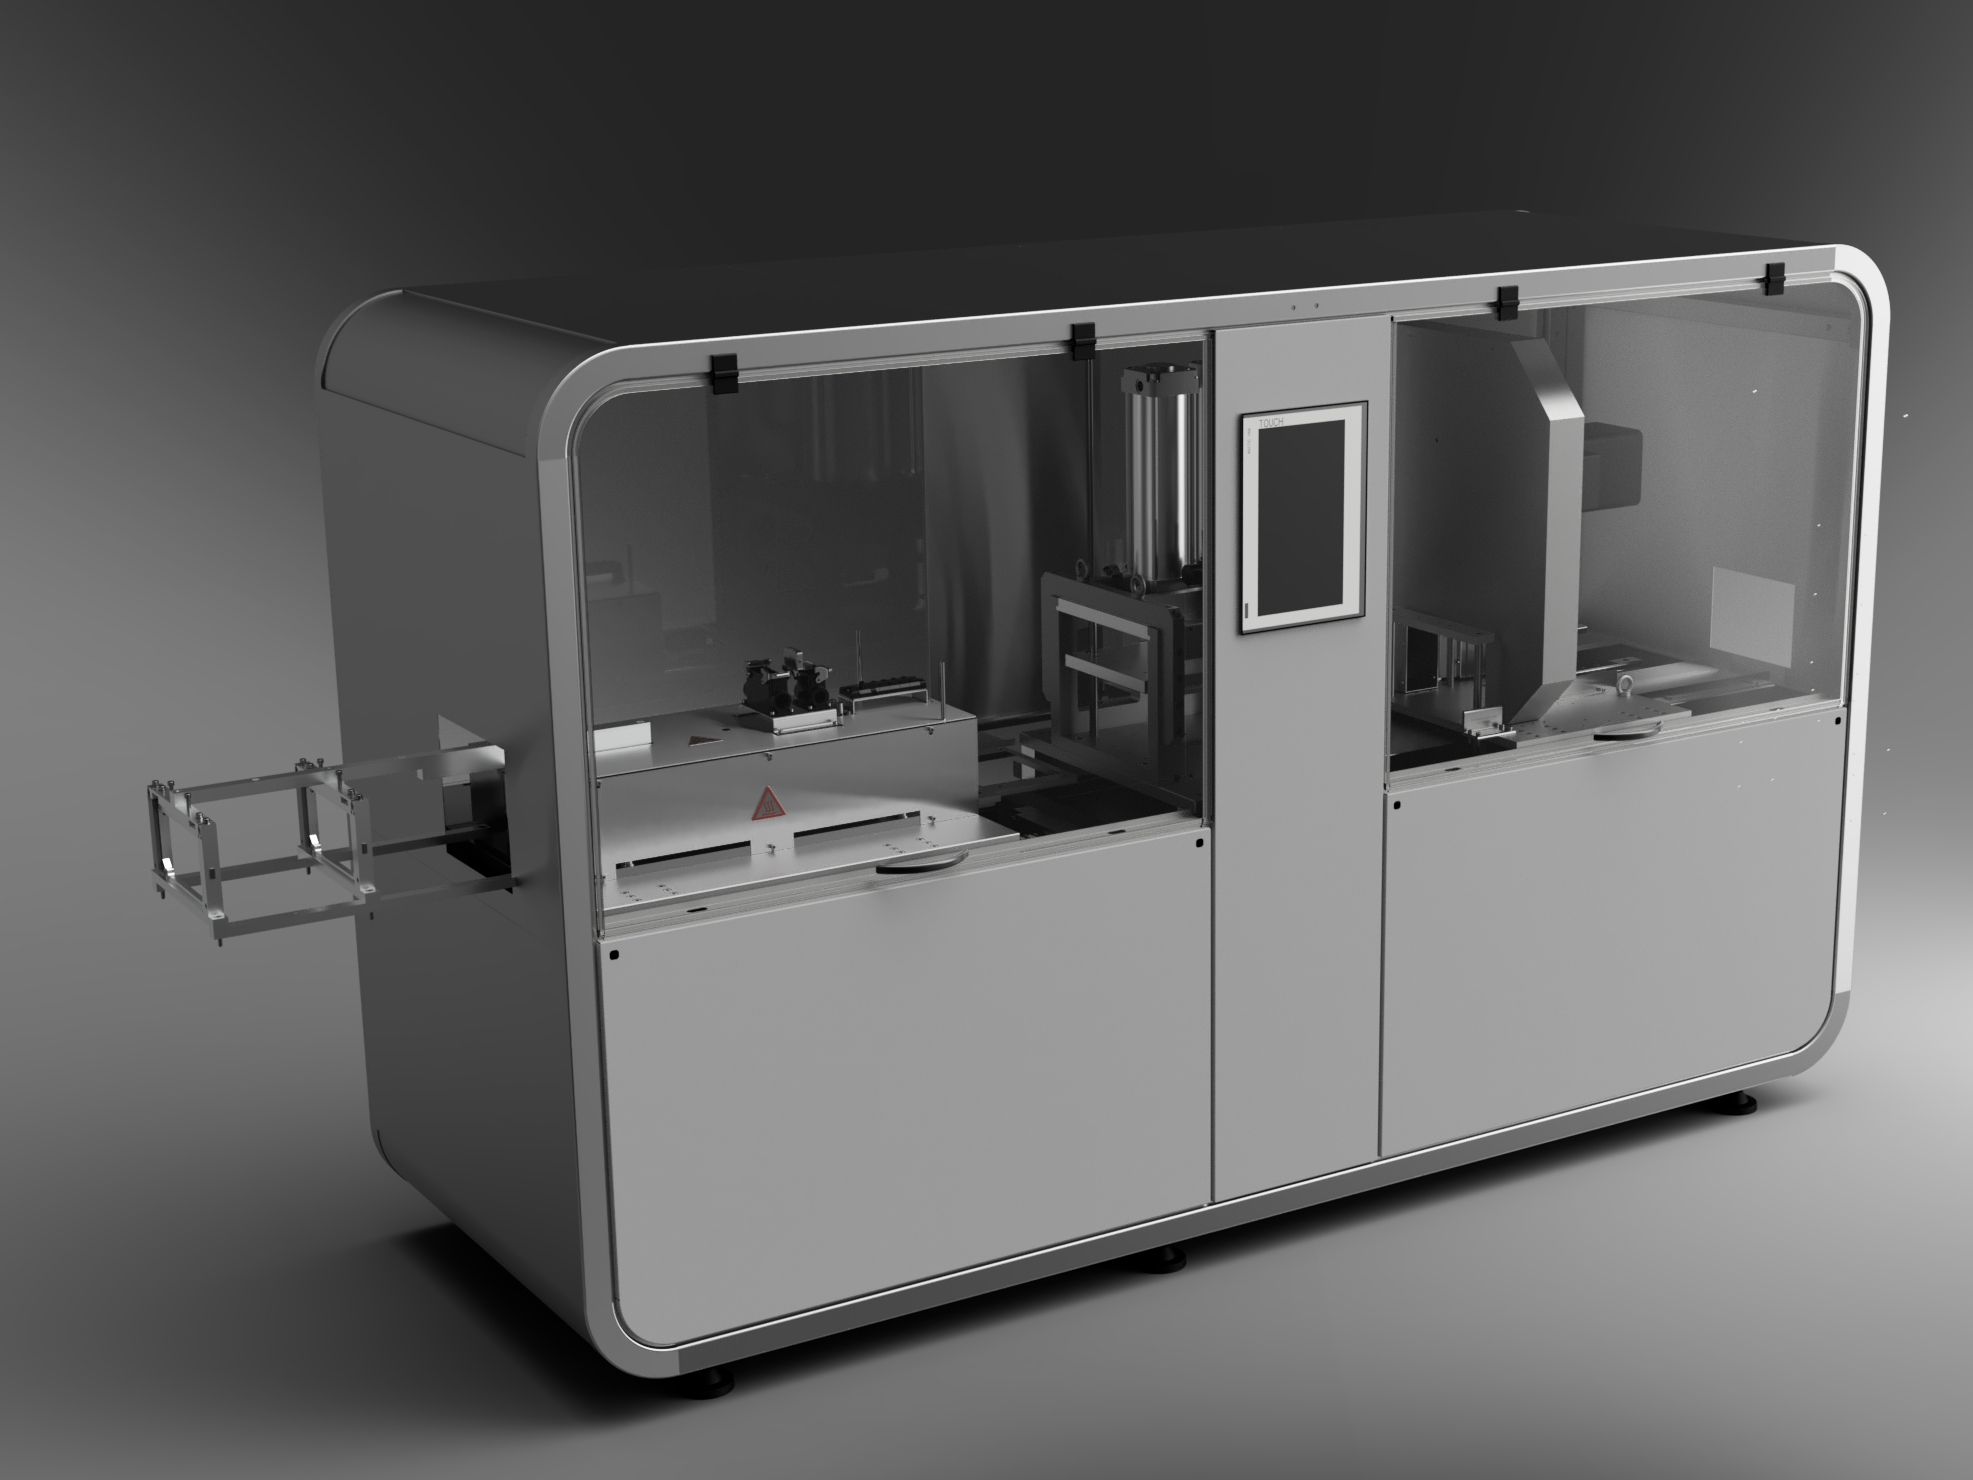 The pullCUBE system is 3.5 m long, around 75% shorter than existing pultrusion machines.